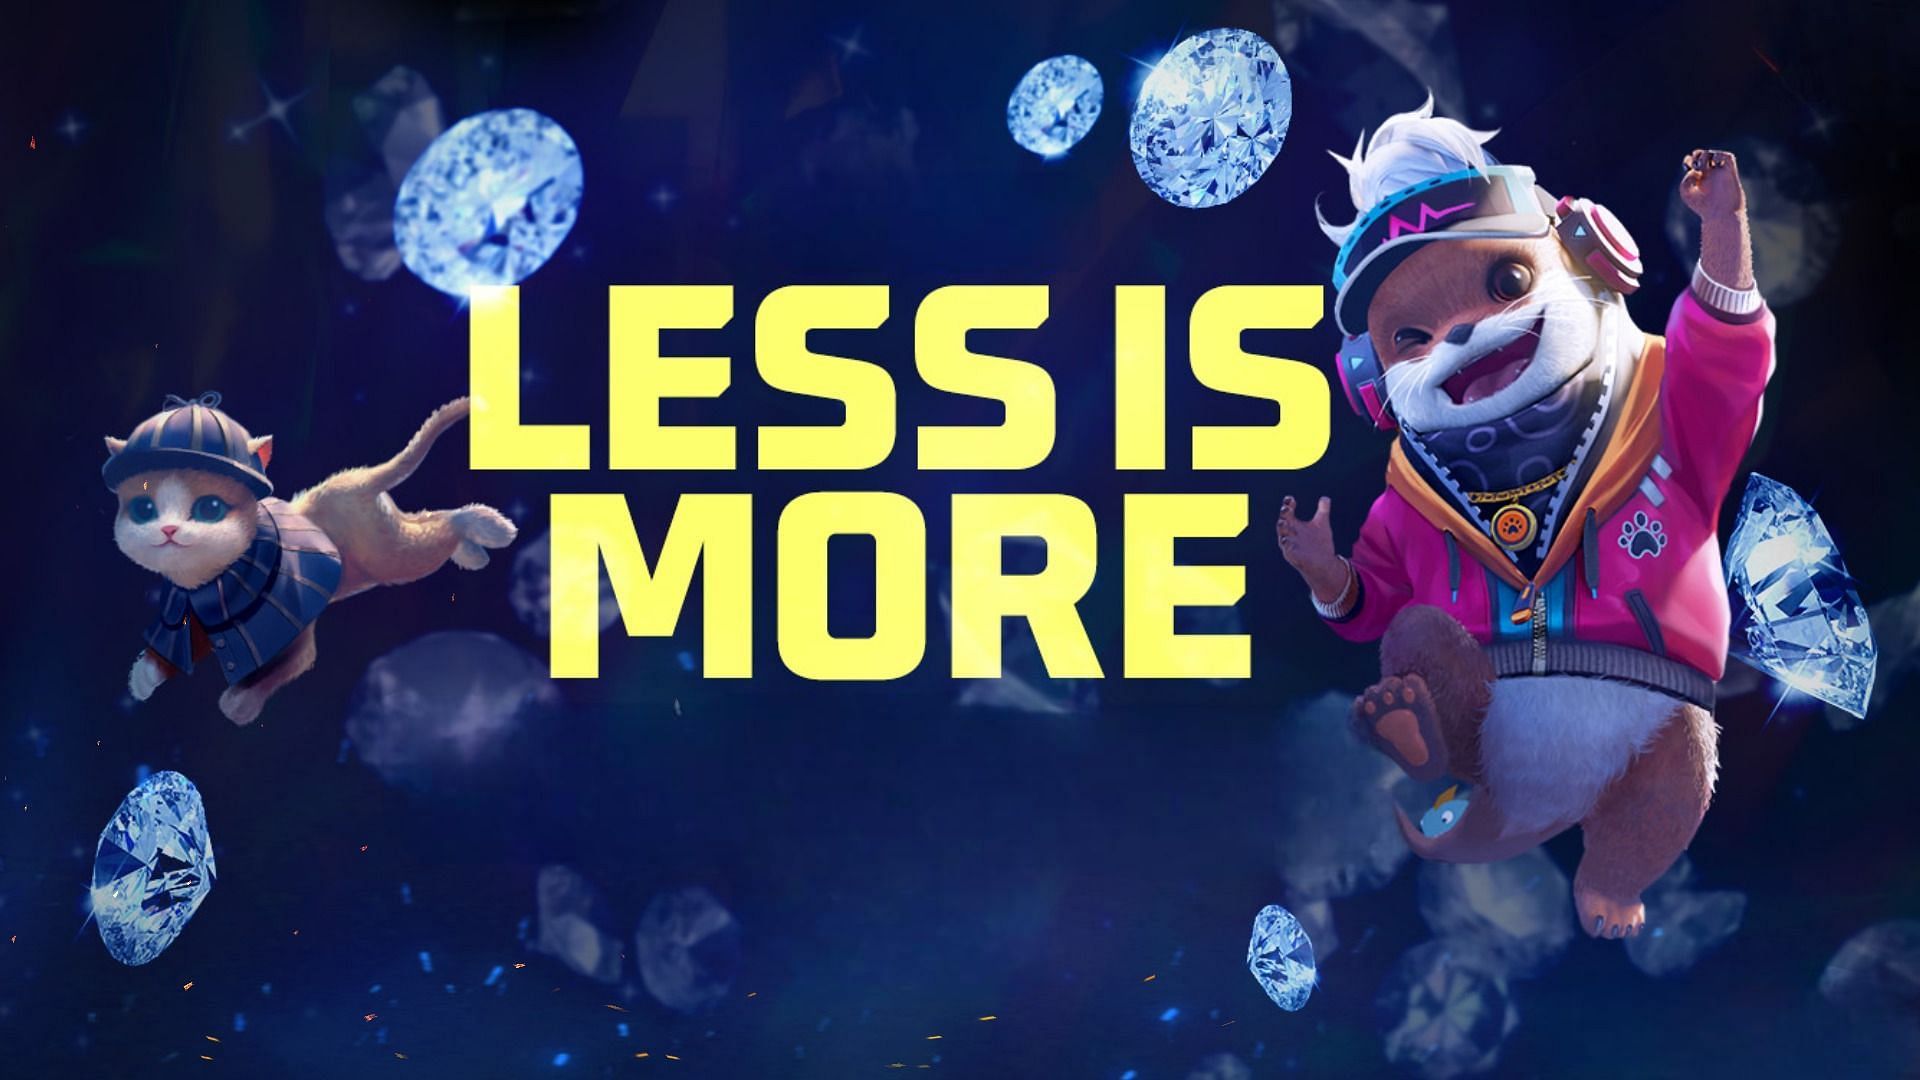 Less is More event has started in Free Fire (Image via Garena)